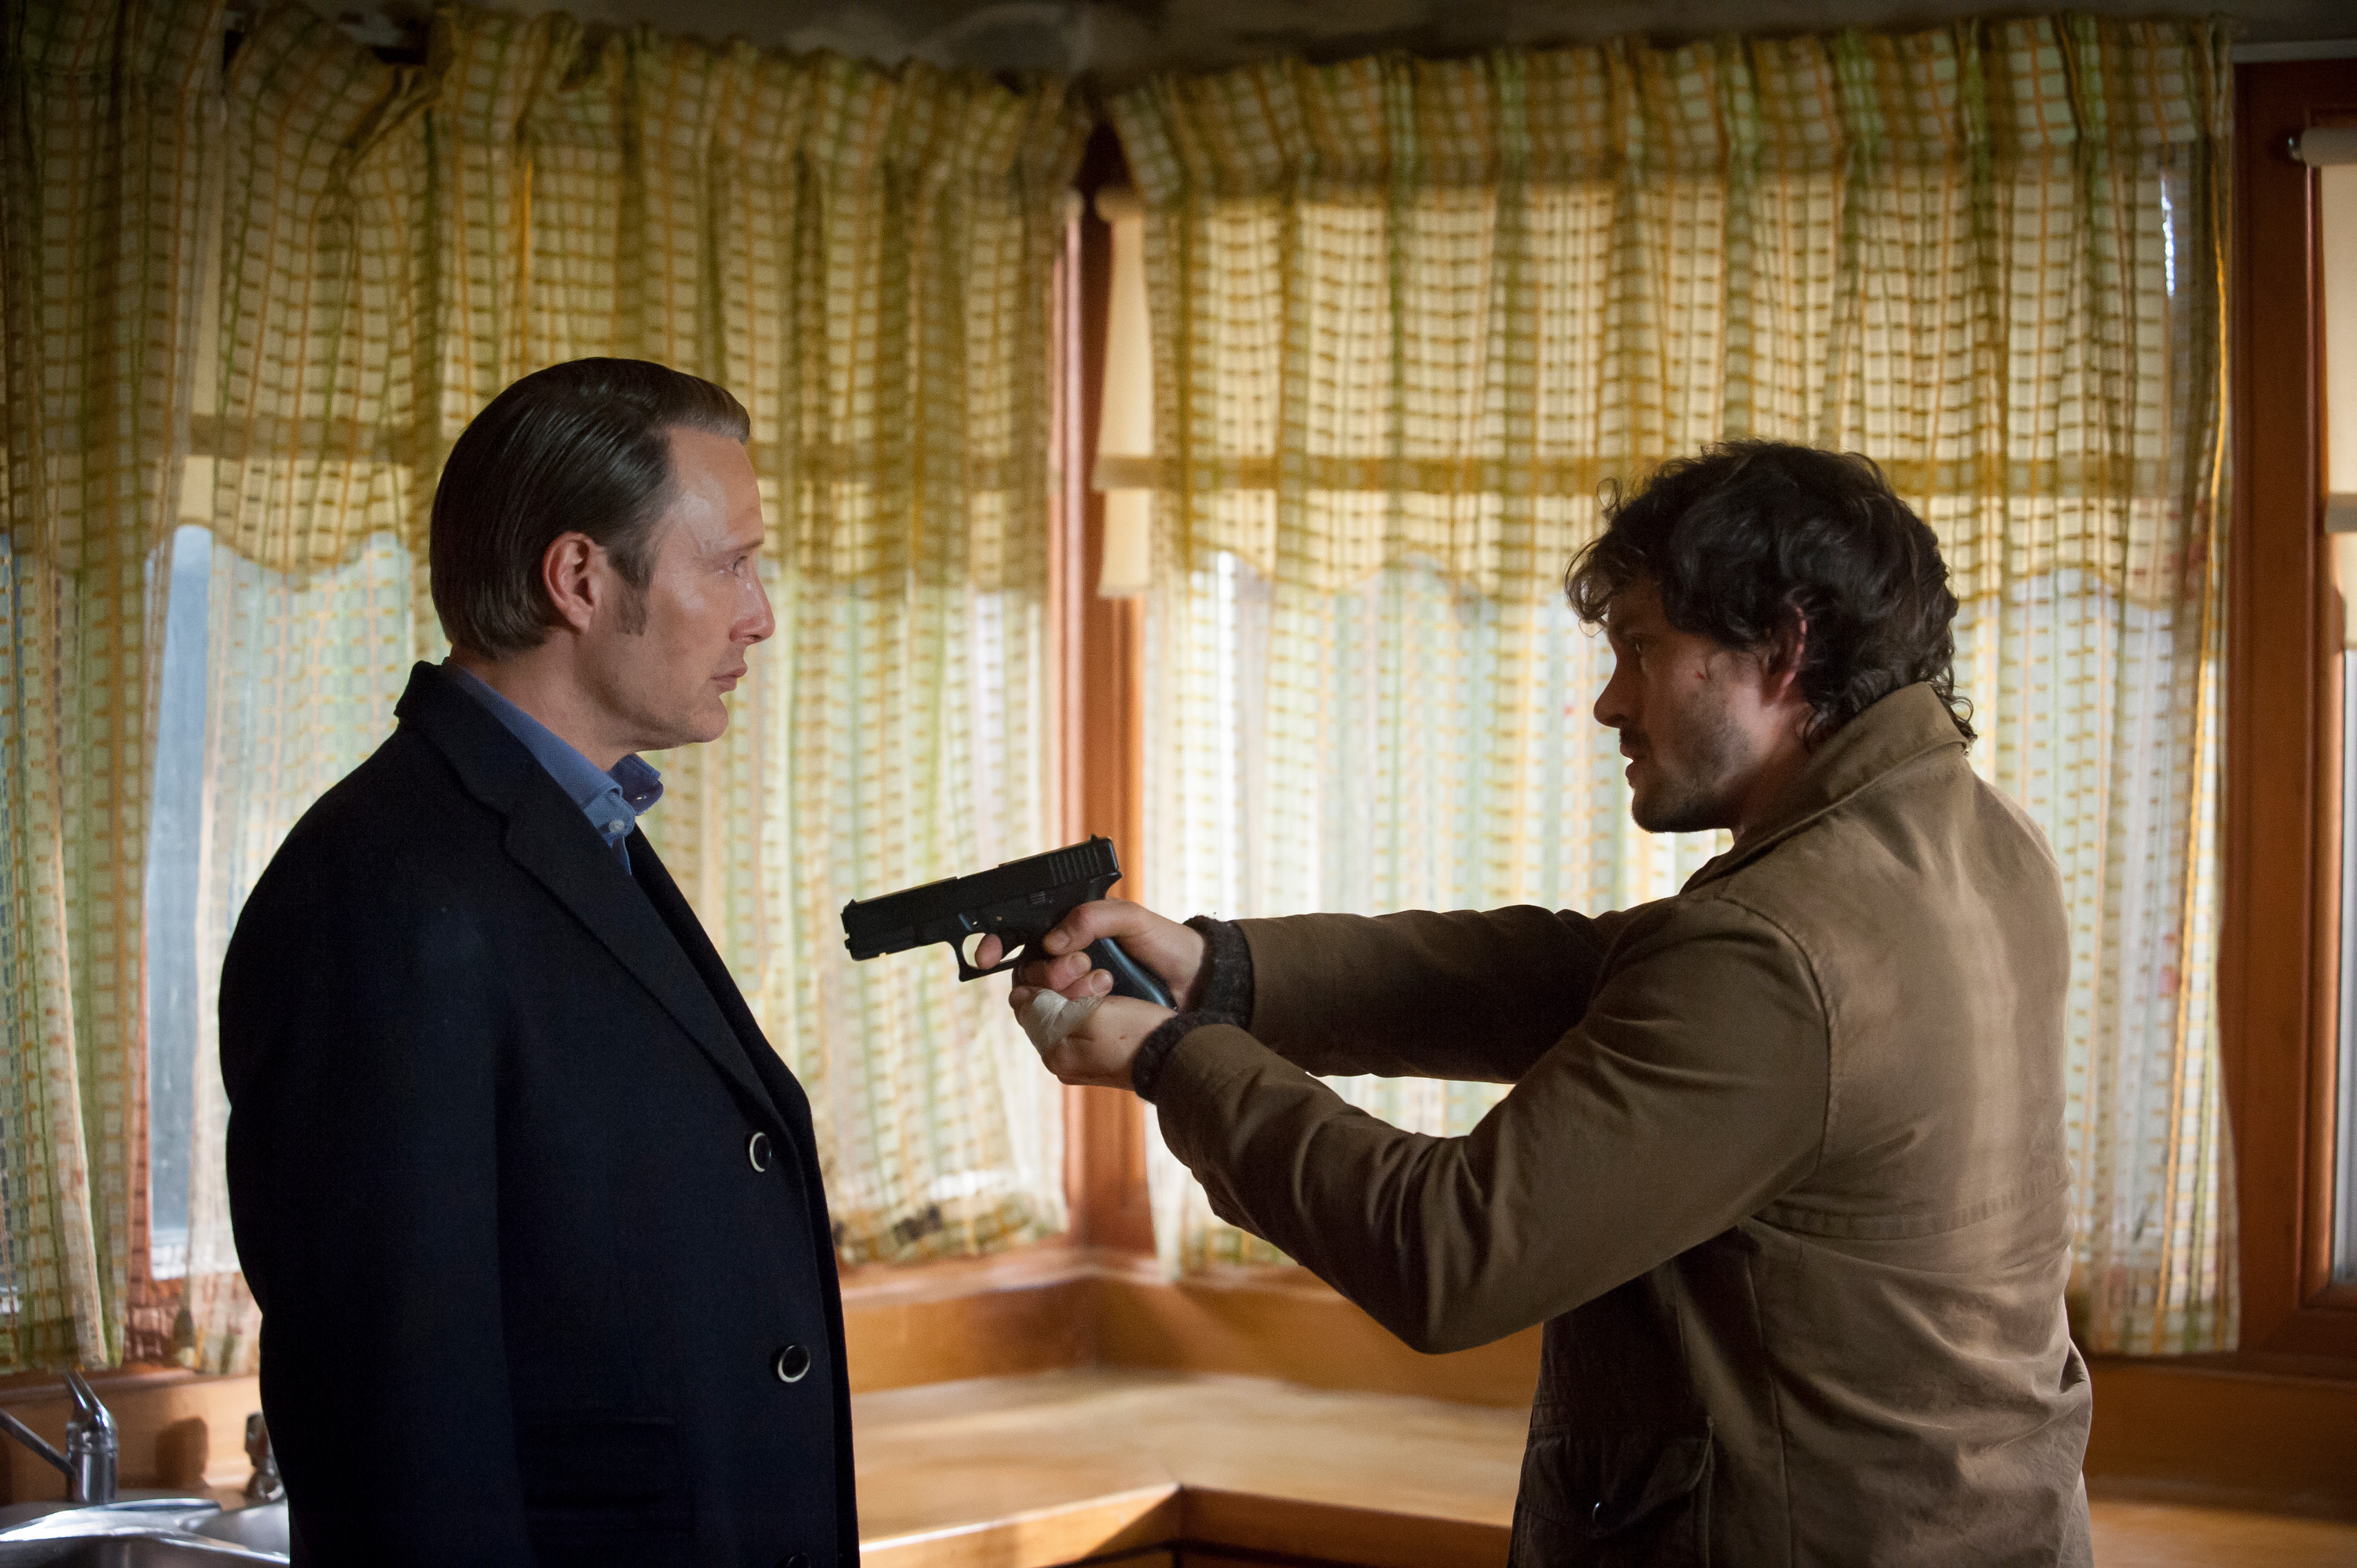 Two main characters in the show hannibal.